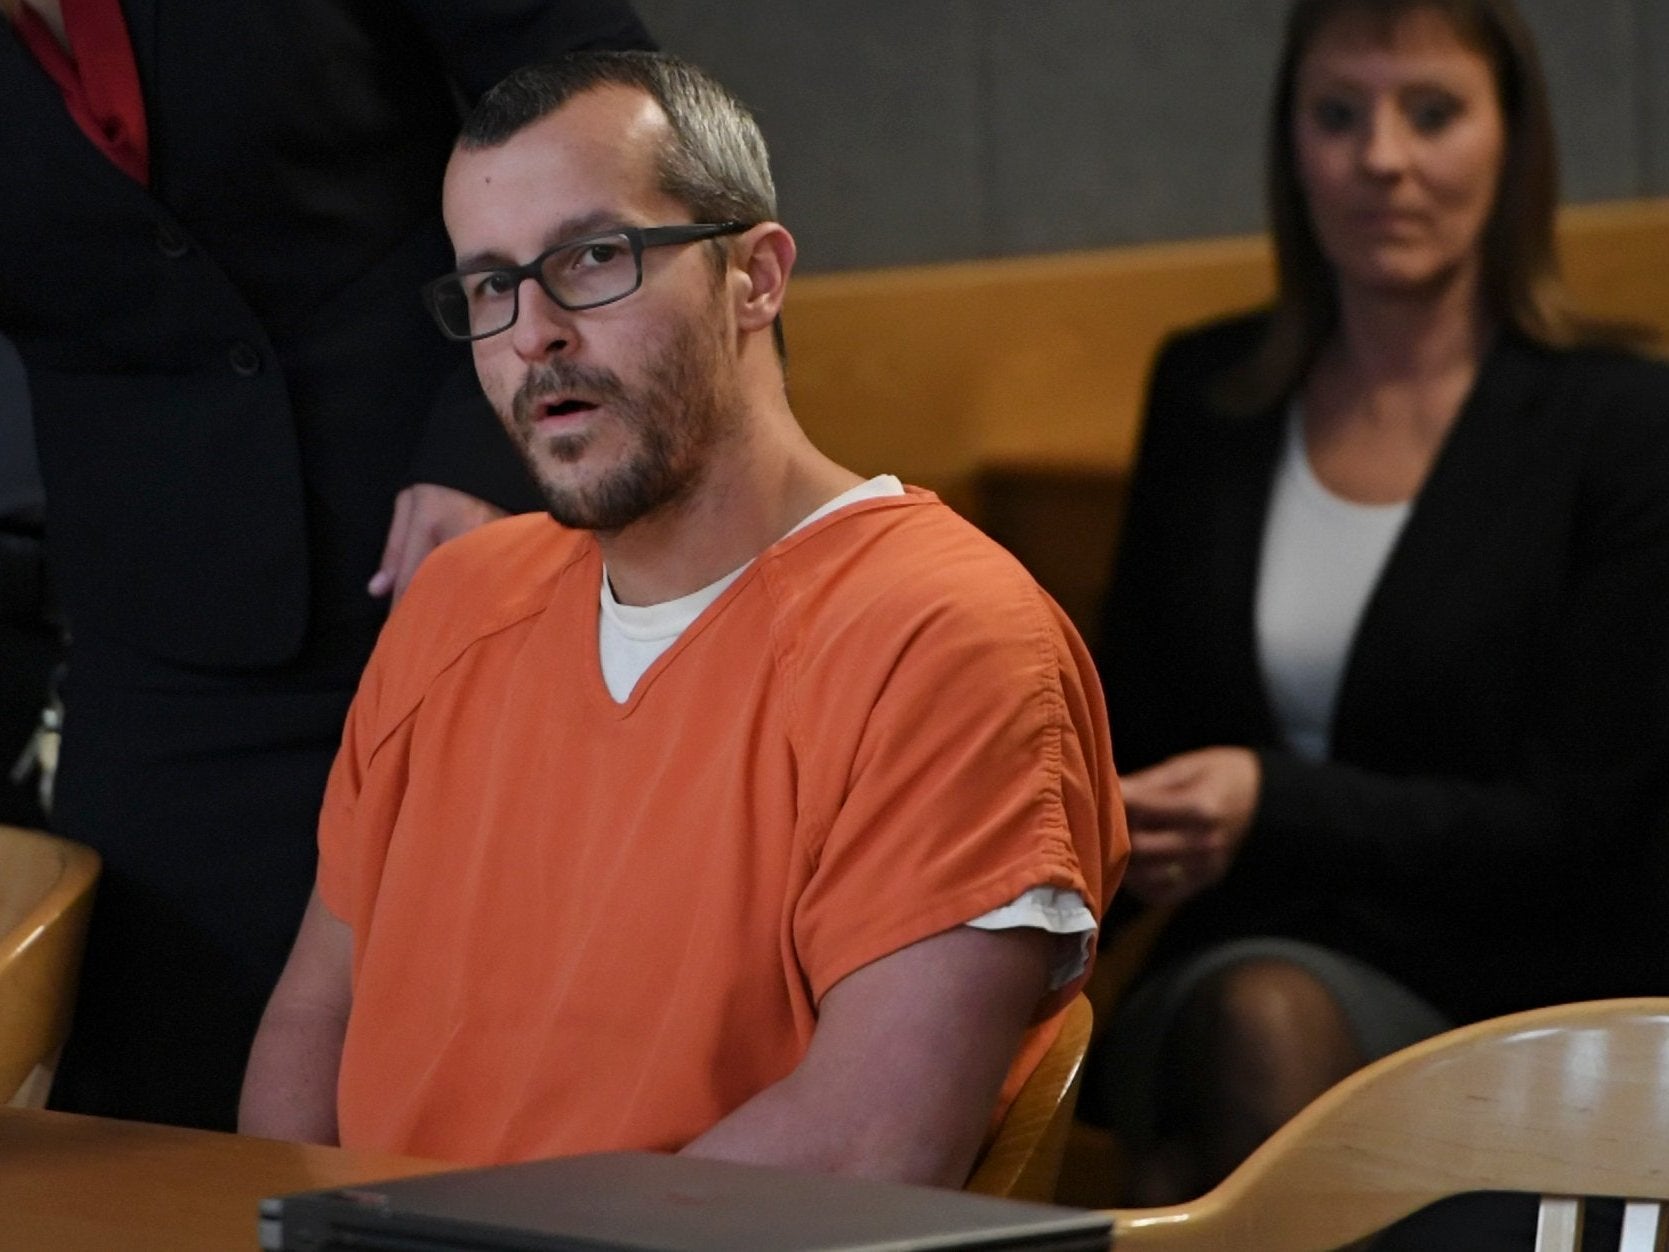 Watts admitted to killing his wife and two daughters